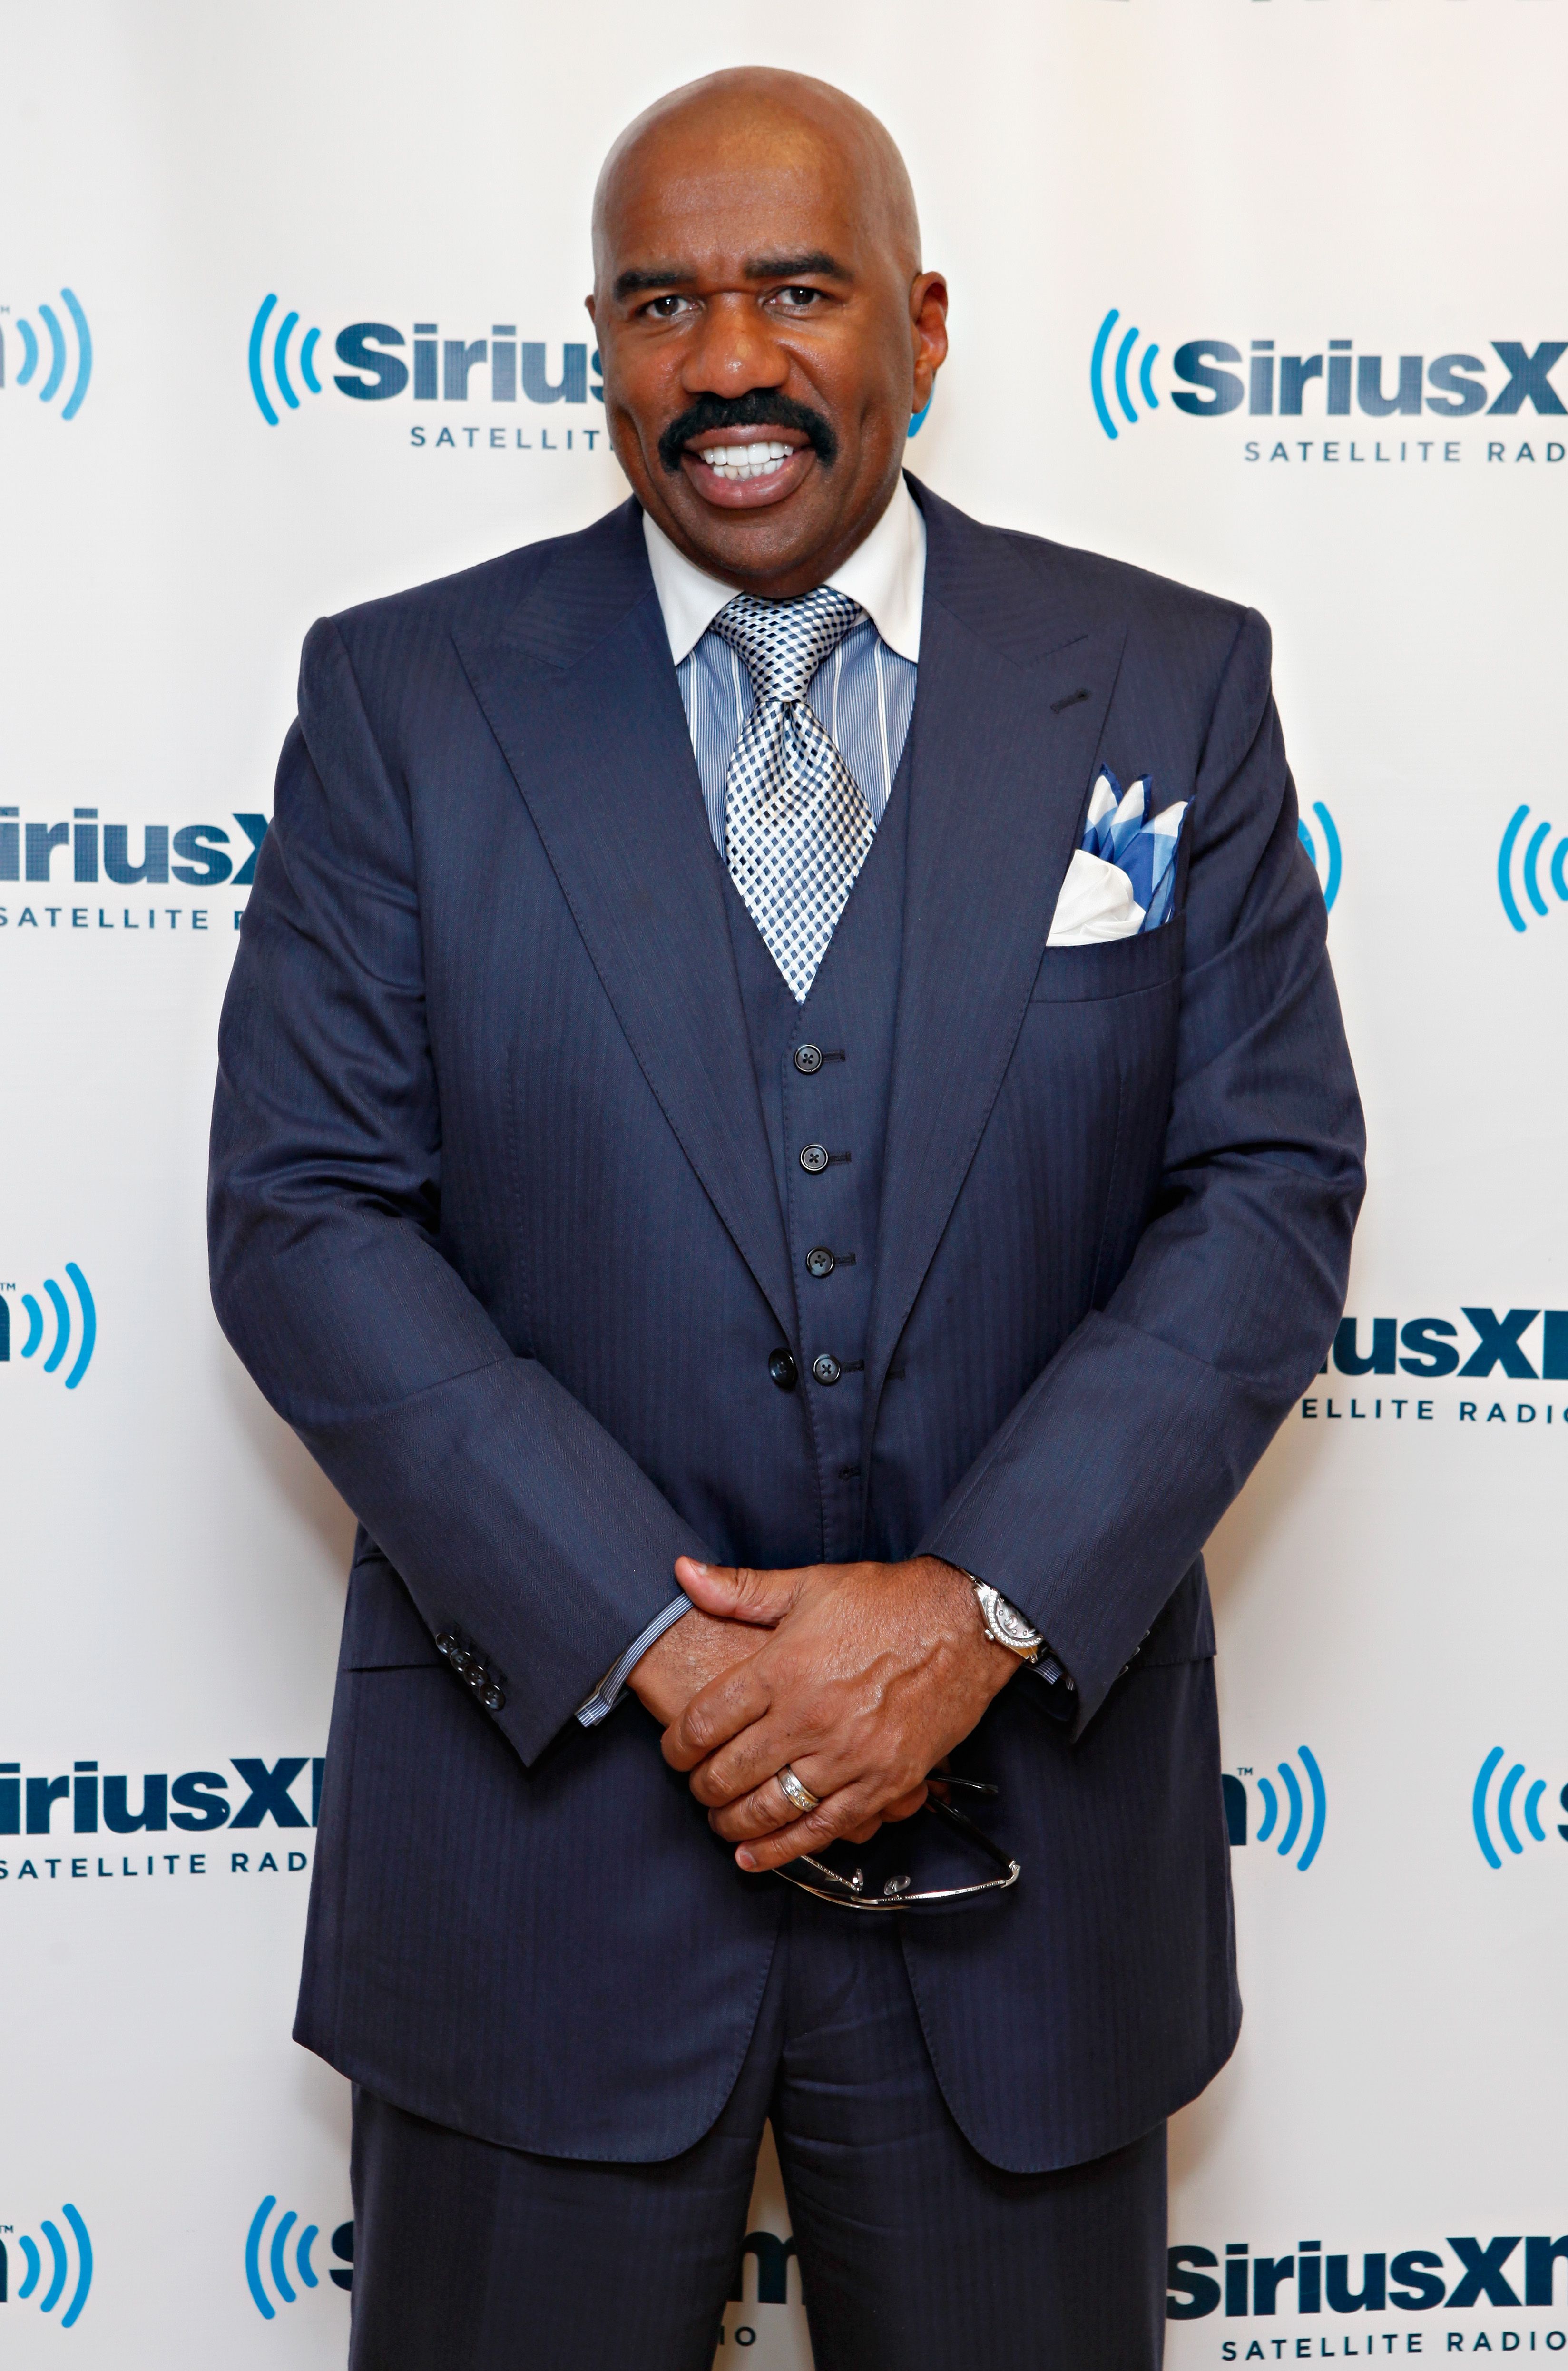 Steve Harvey at the SiriusXM Studio on August 29, 2012 in New York City. | Source: Getty Images